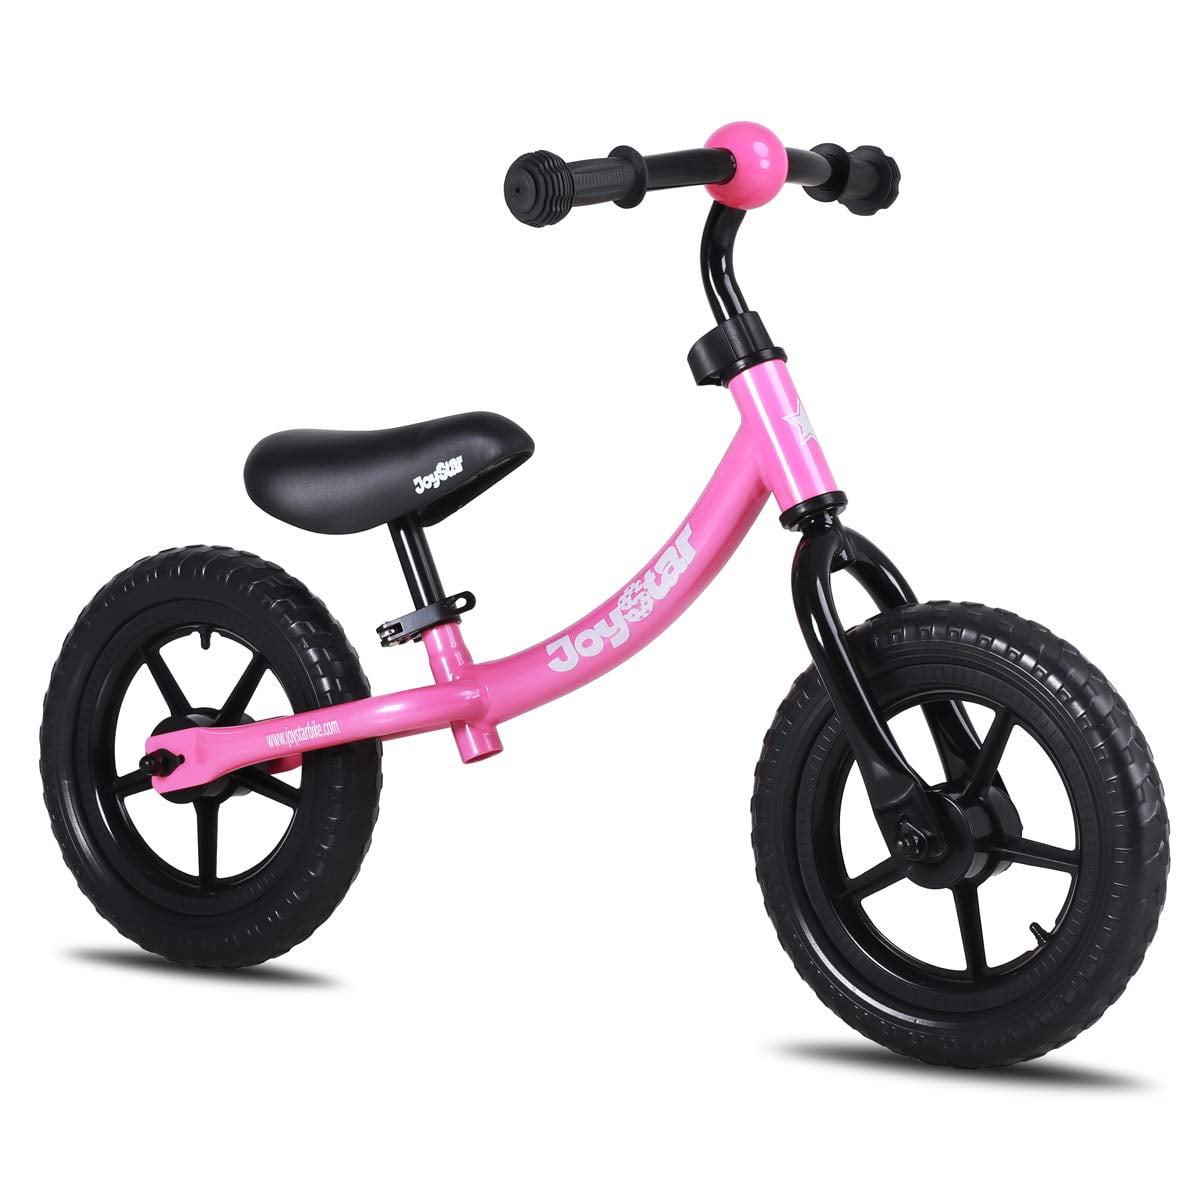 Lightweight,Adjustable and Comfortable Seat HNVEY Kids Balance Bike for 2-8 Years Old Durable Tires Maintenance-Free Worry-Free 